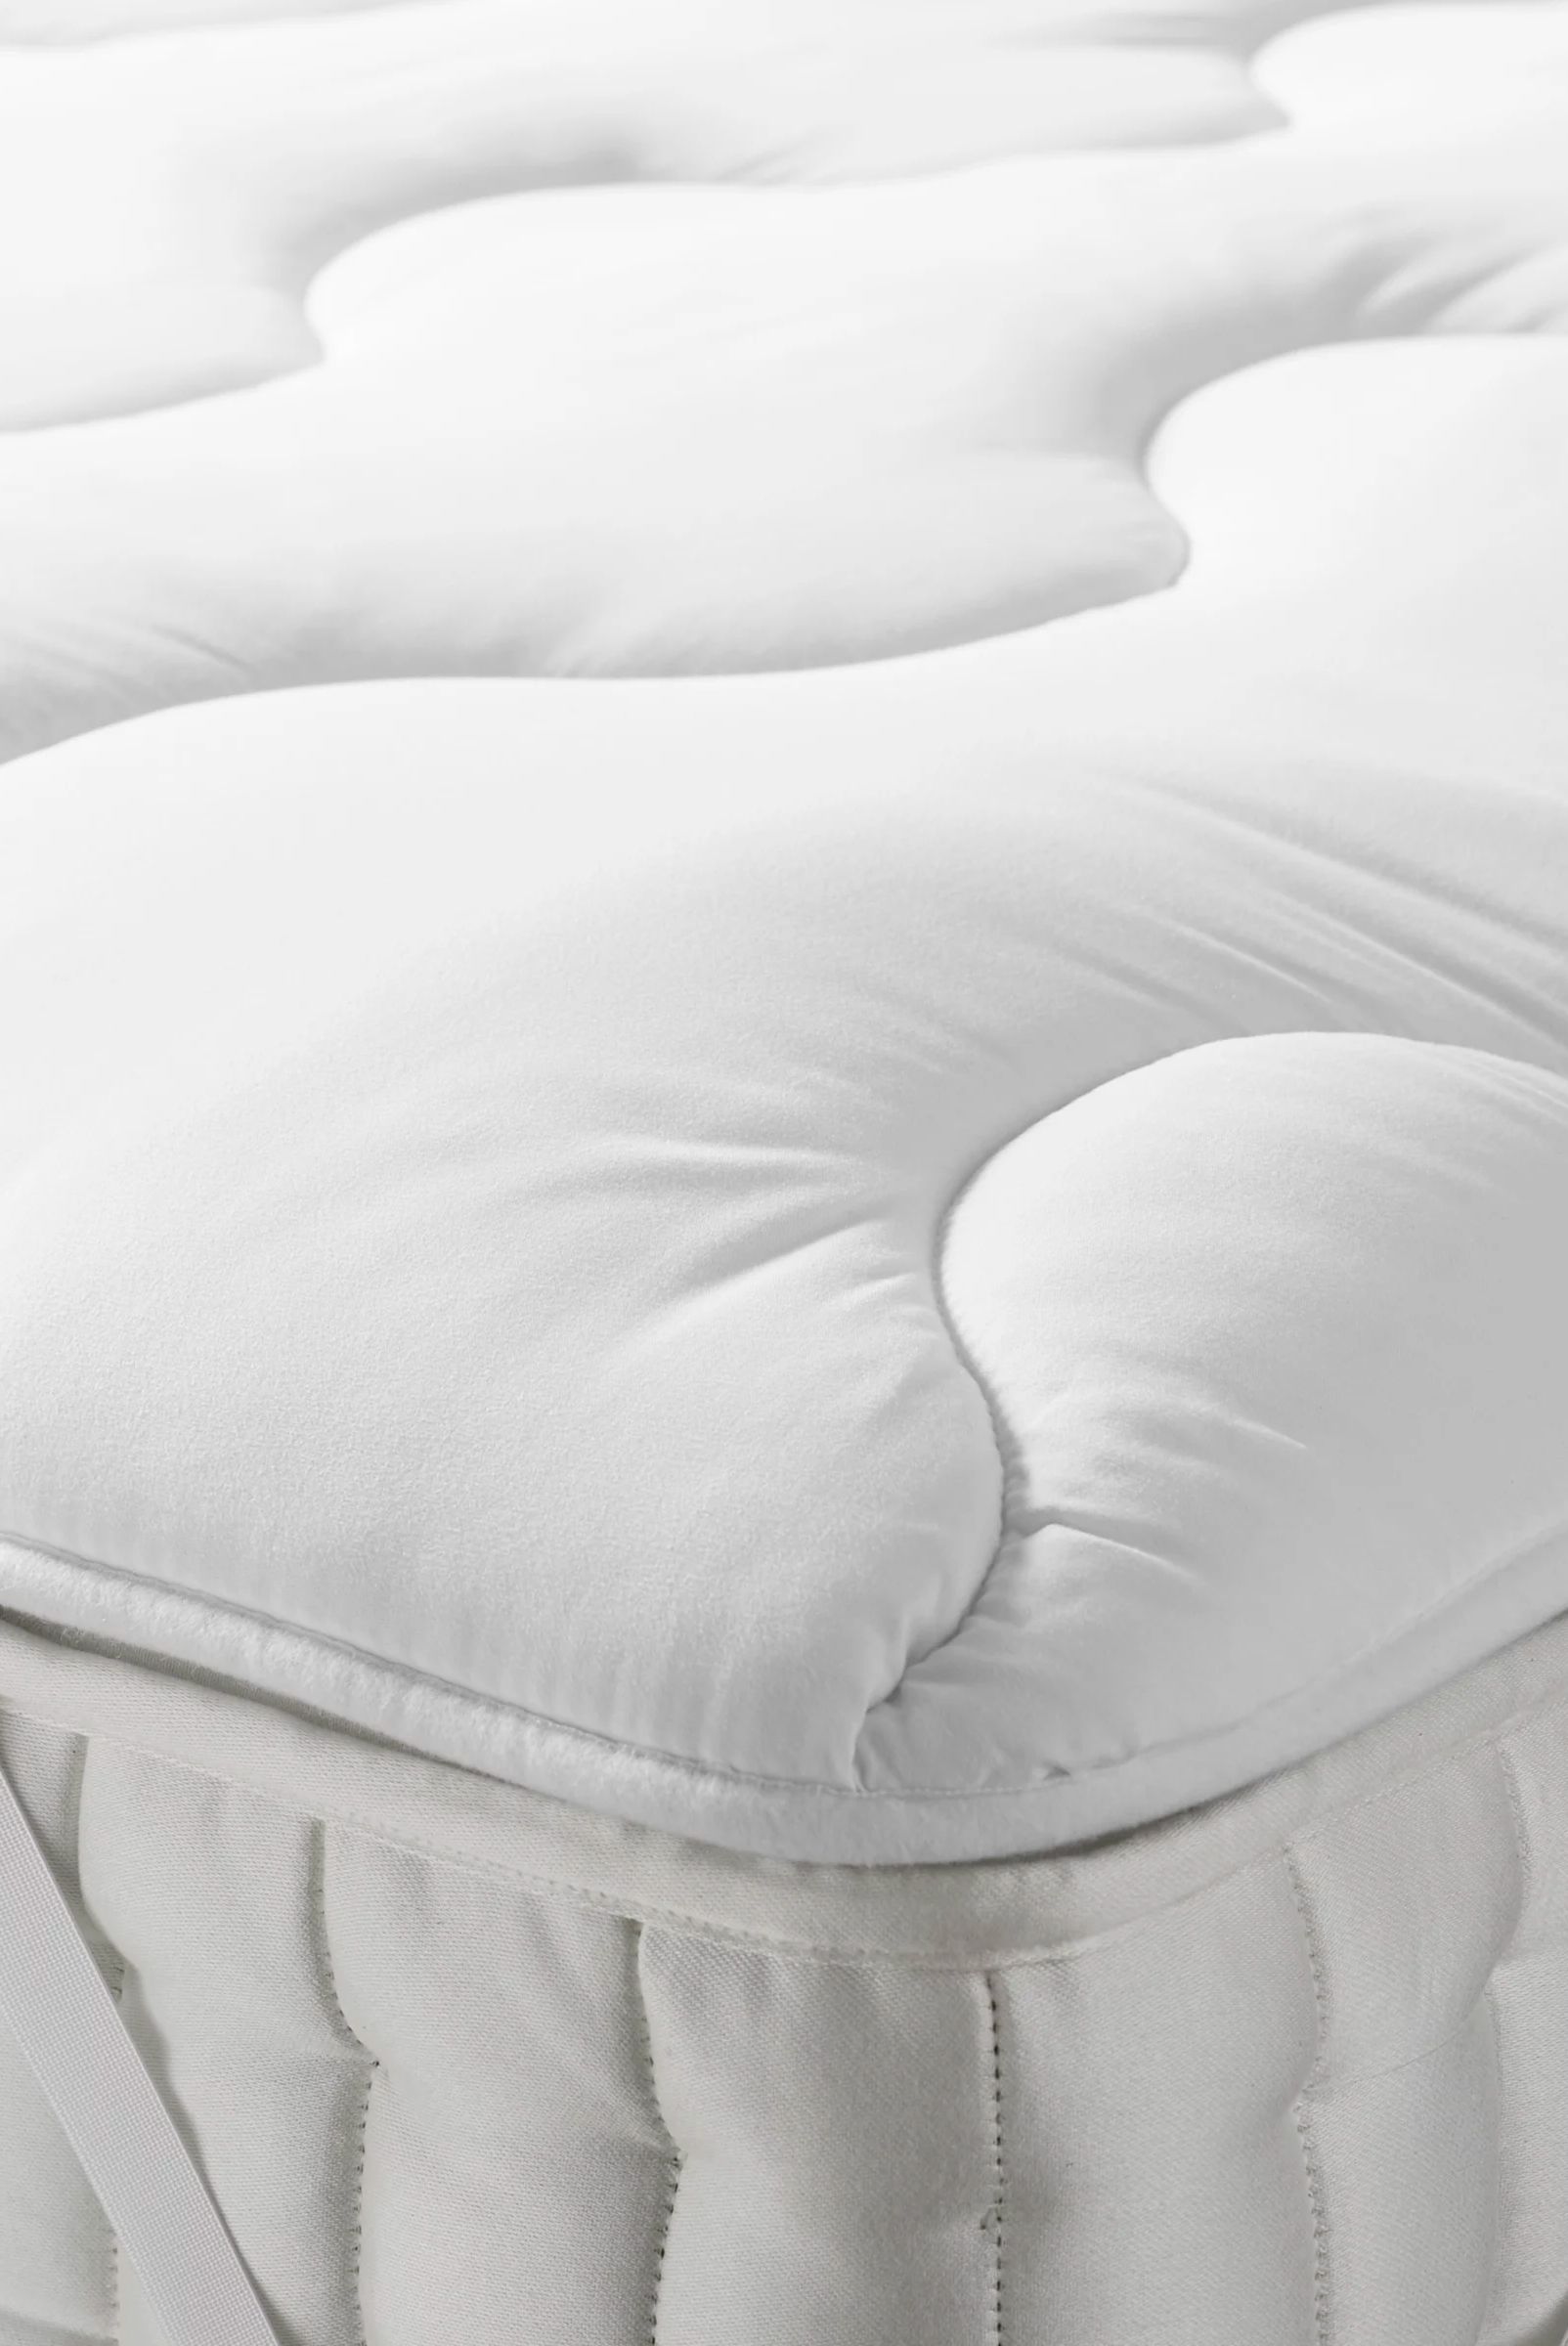 John Lewis ANYDAY Synthetic Soft and Light Mattress Topper, Single, £35.00